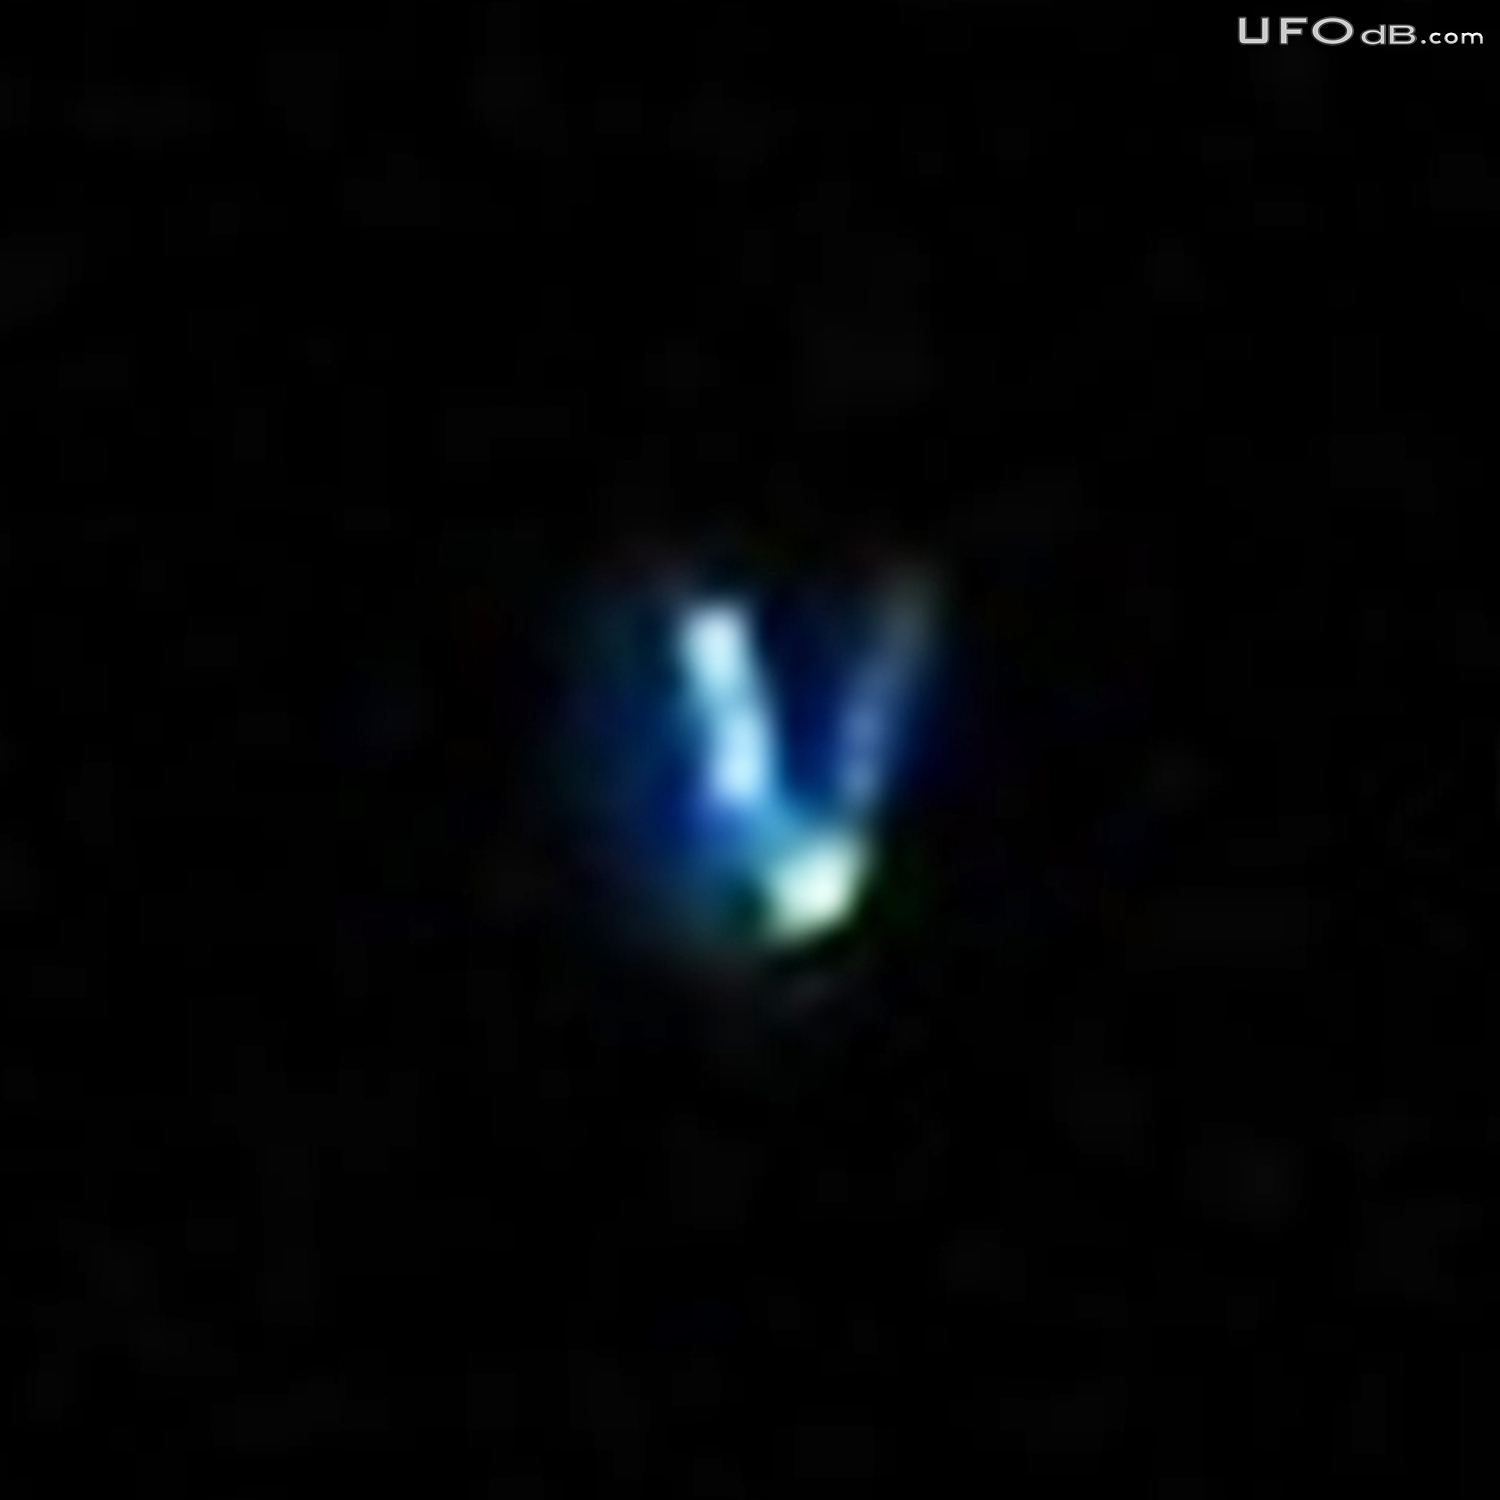 Alien Space Station taken on picture | Alberta Canada | January 2011 UFO Picture #270-2